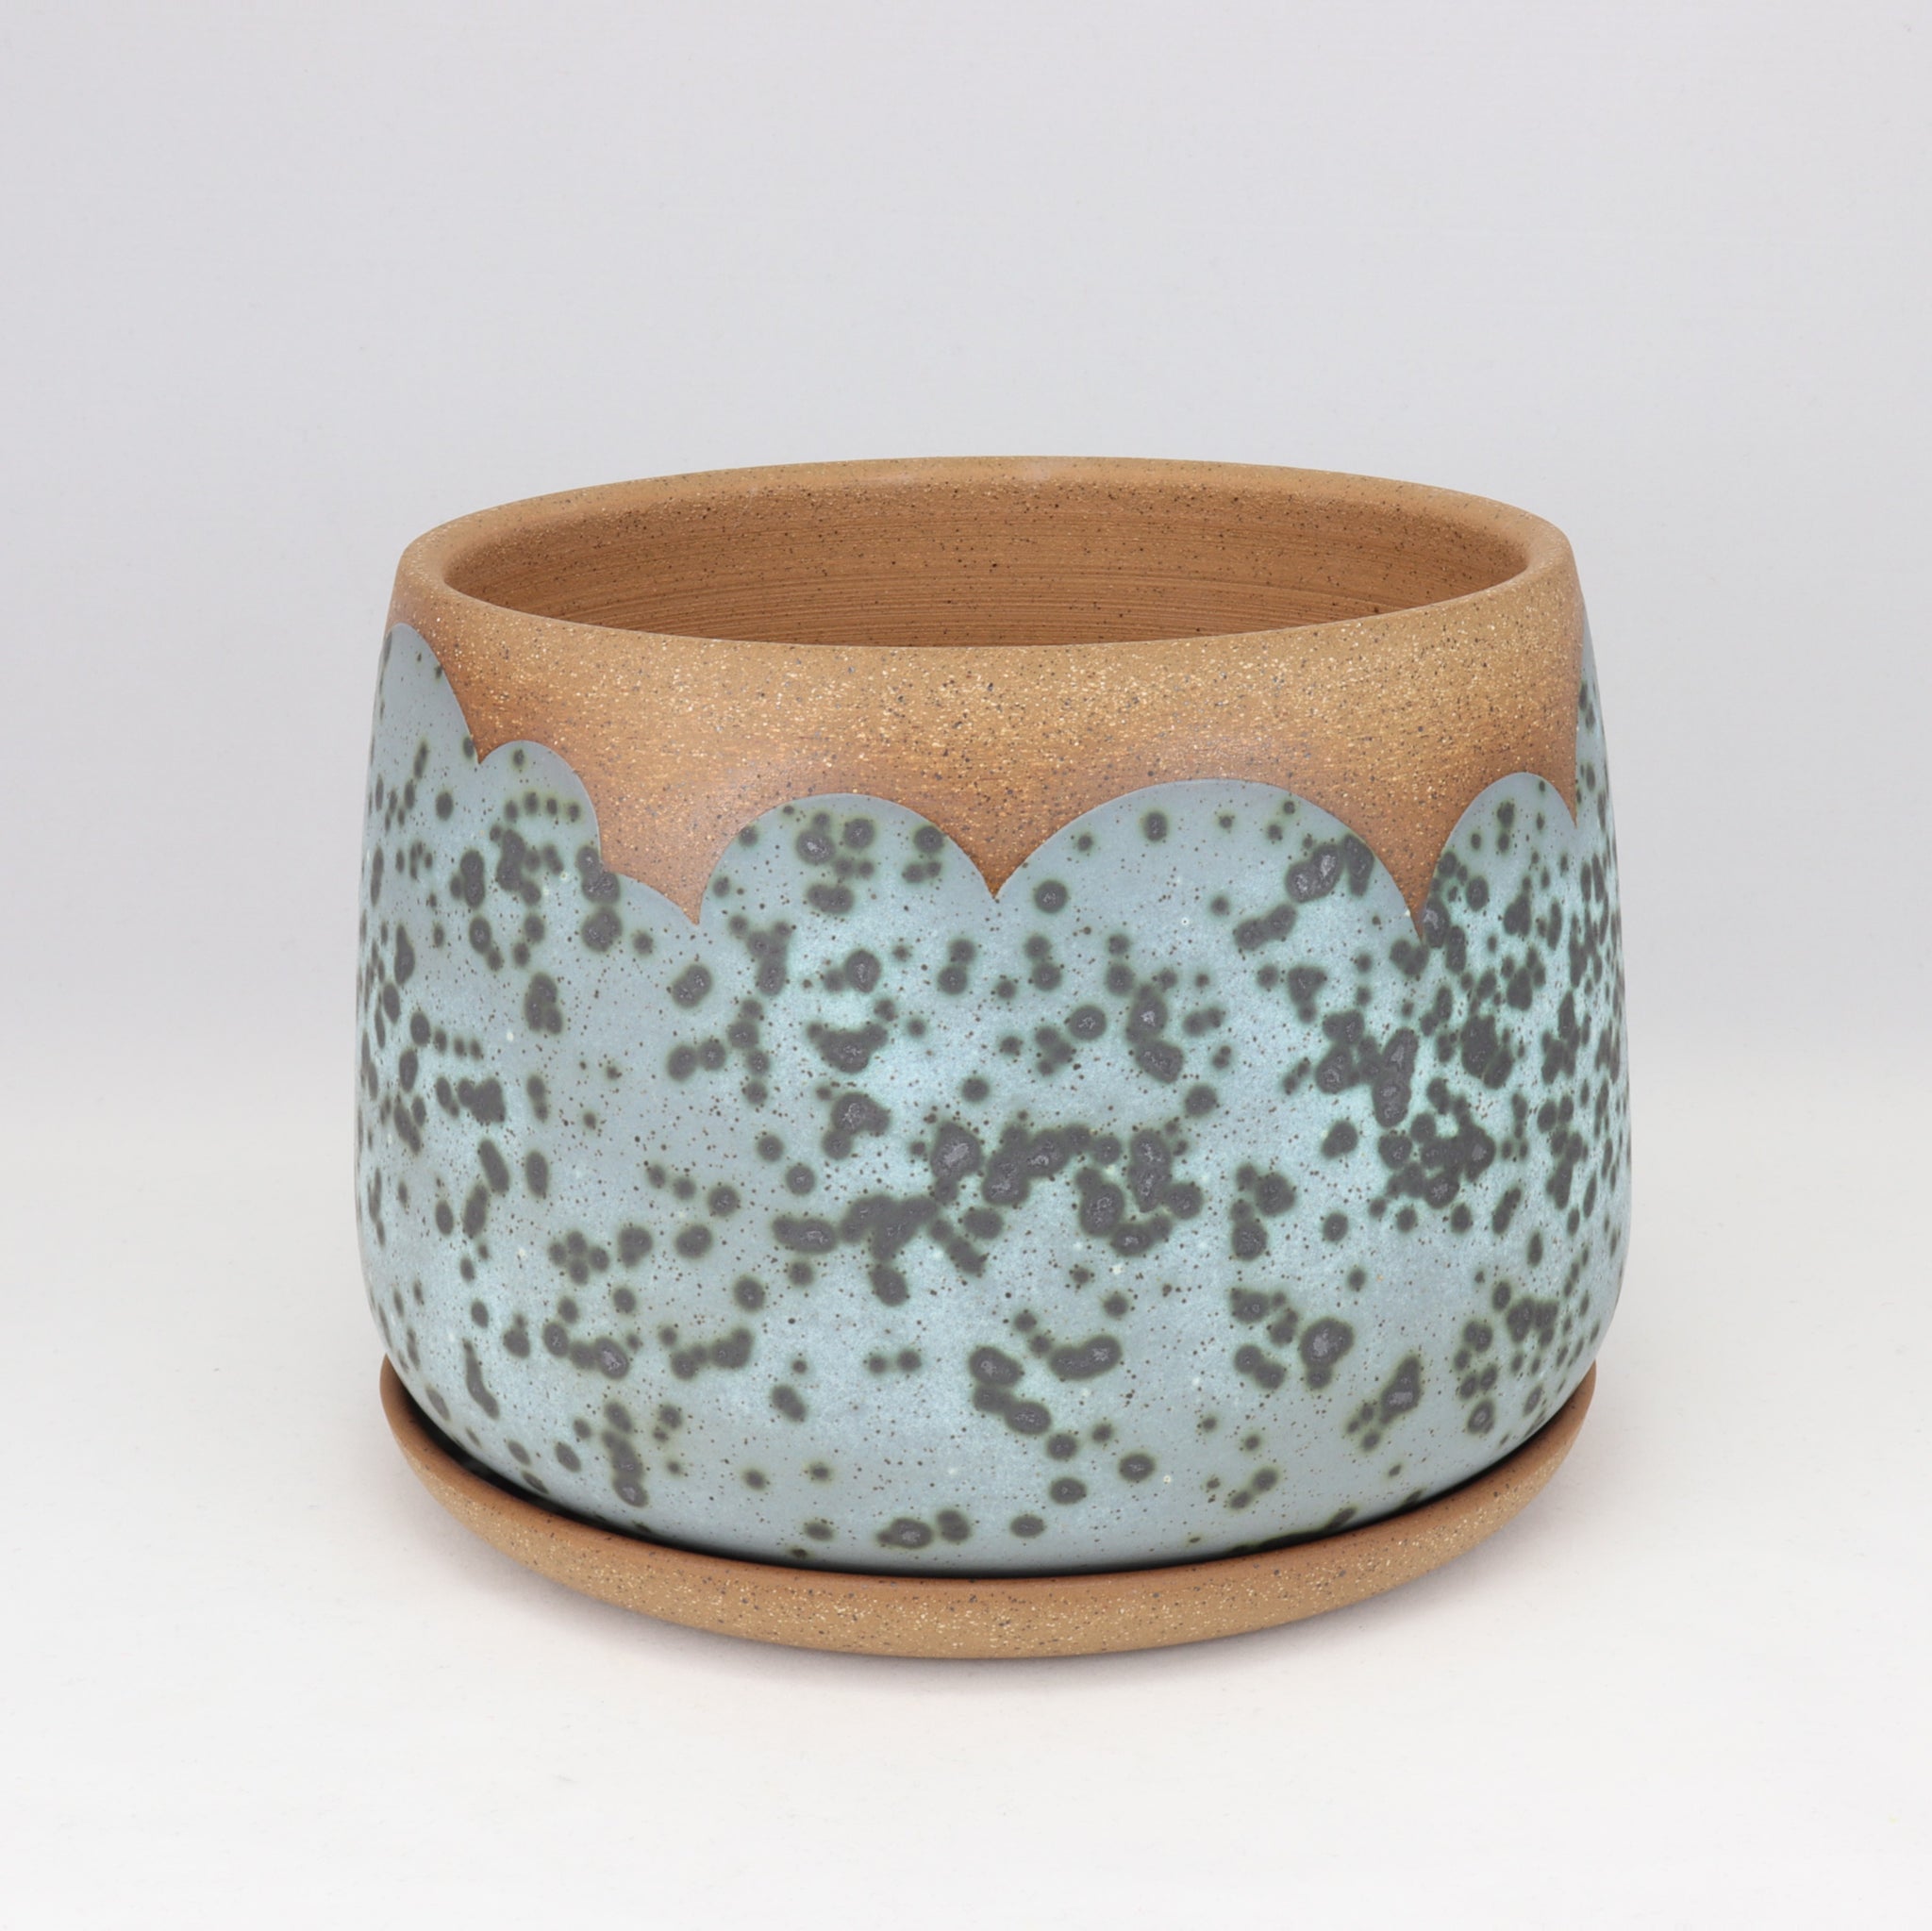 Moonscape Planter on Speckled Clay (with minor defect), 7 in / 18 cm